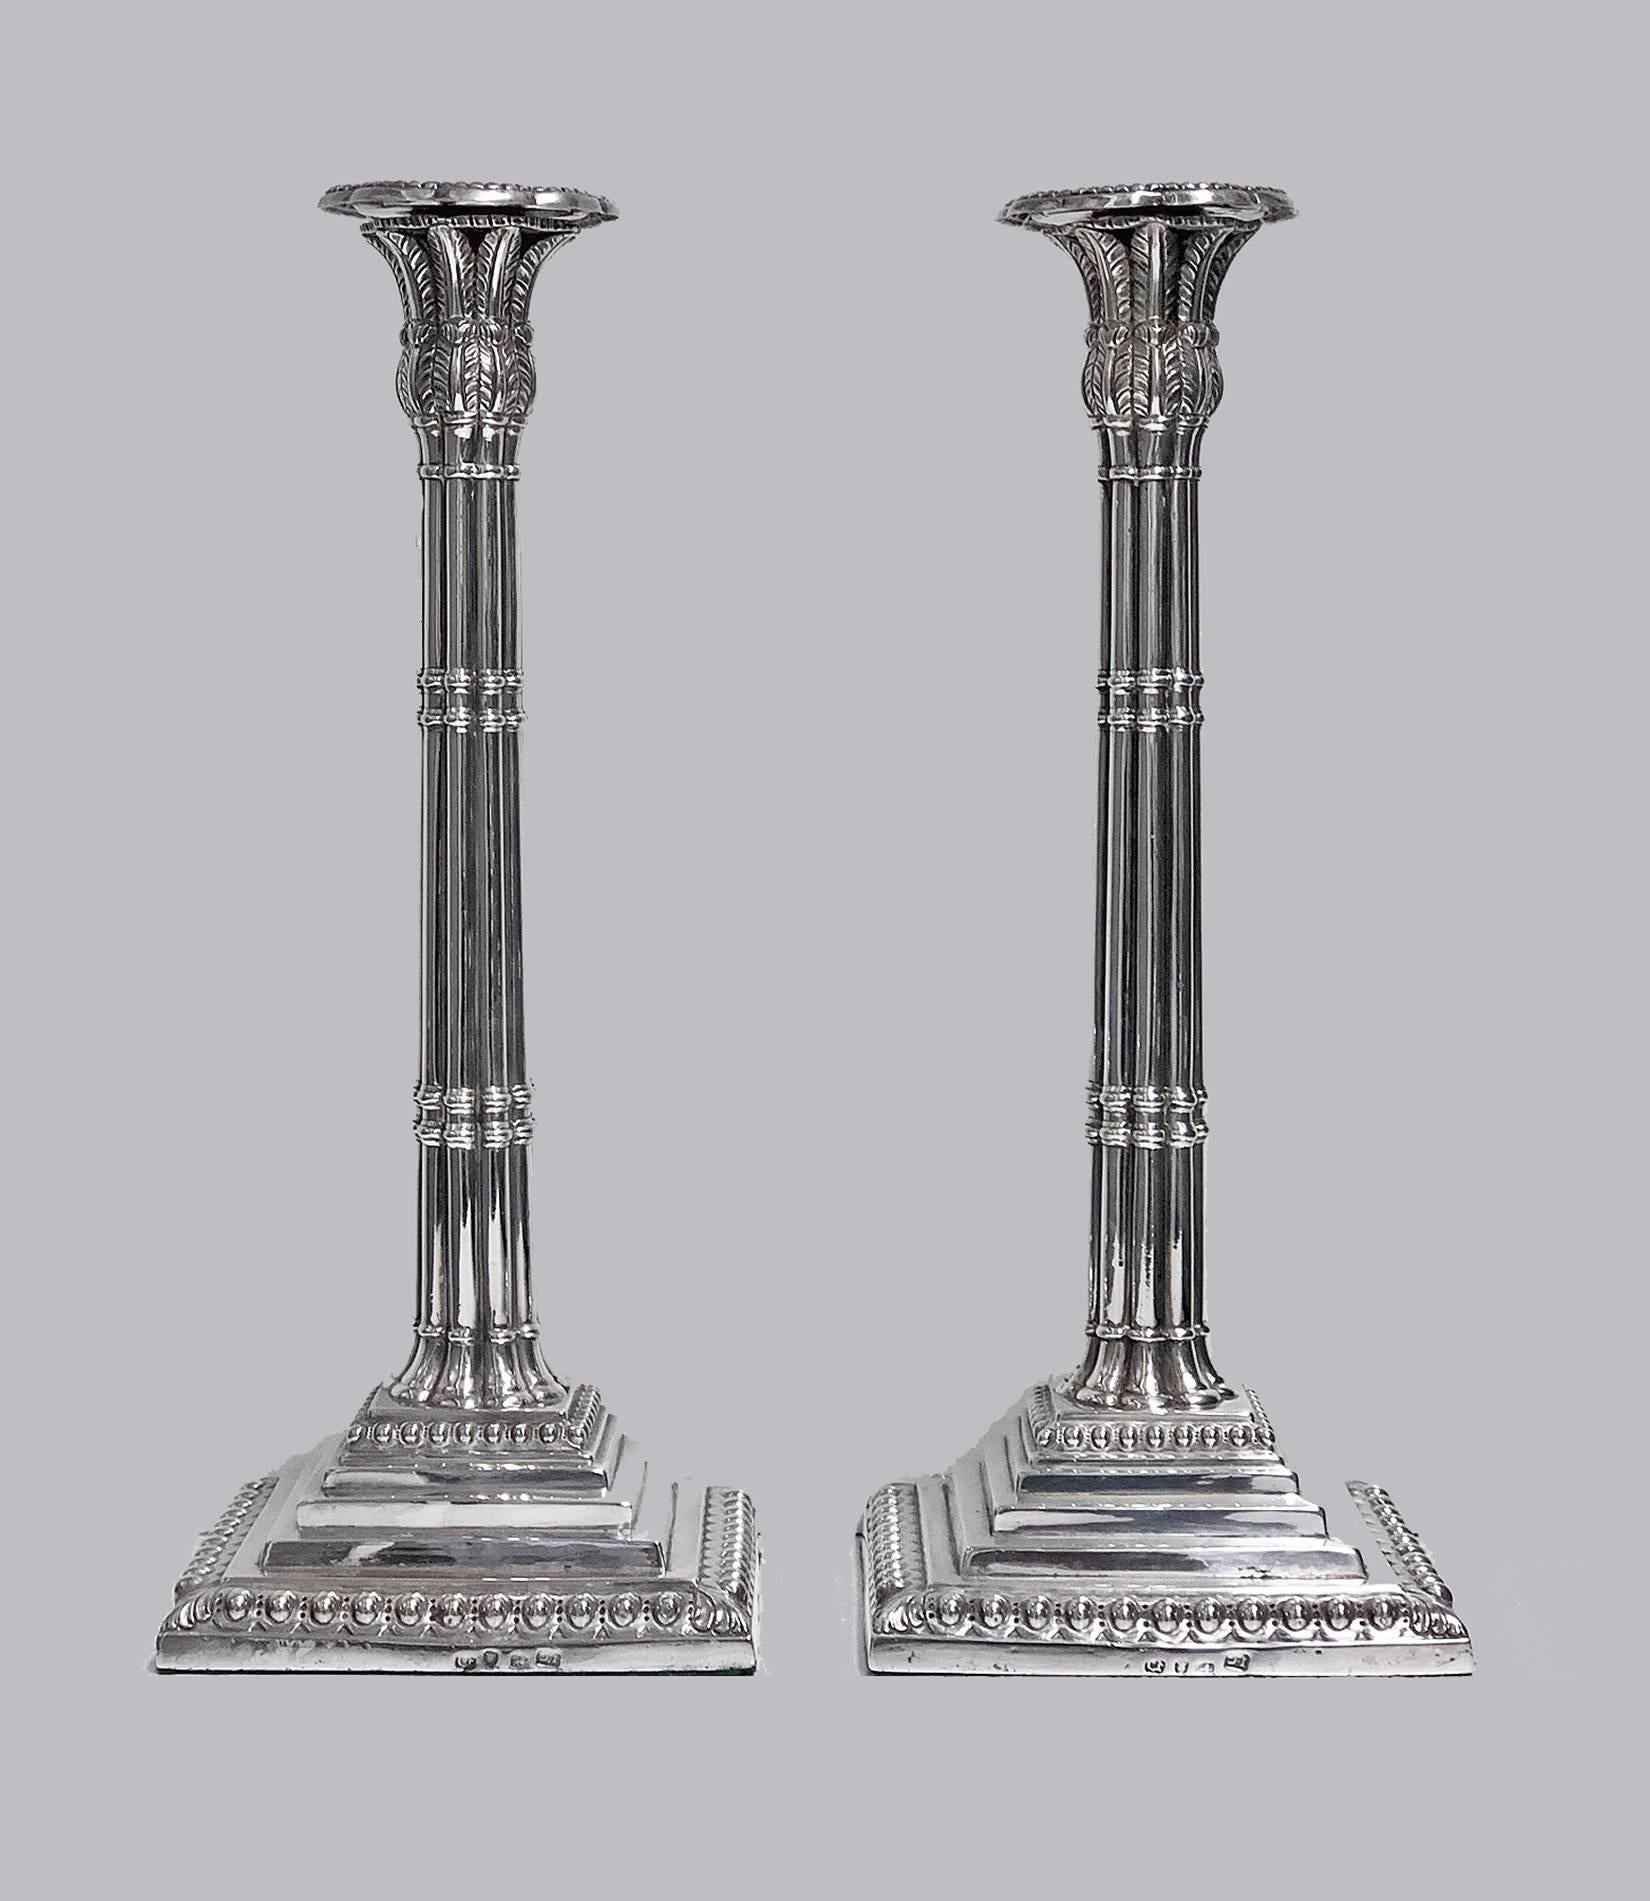 George 11 silver candlesticks, London 1759 John Carter. The loaded Candlesticks of Corinthian column-form, stepped bases with upper and lower ovolo borders, bamboo style stems, acanthus anthemion like sconces, removable gadroon border nozzles. Full